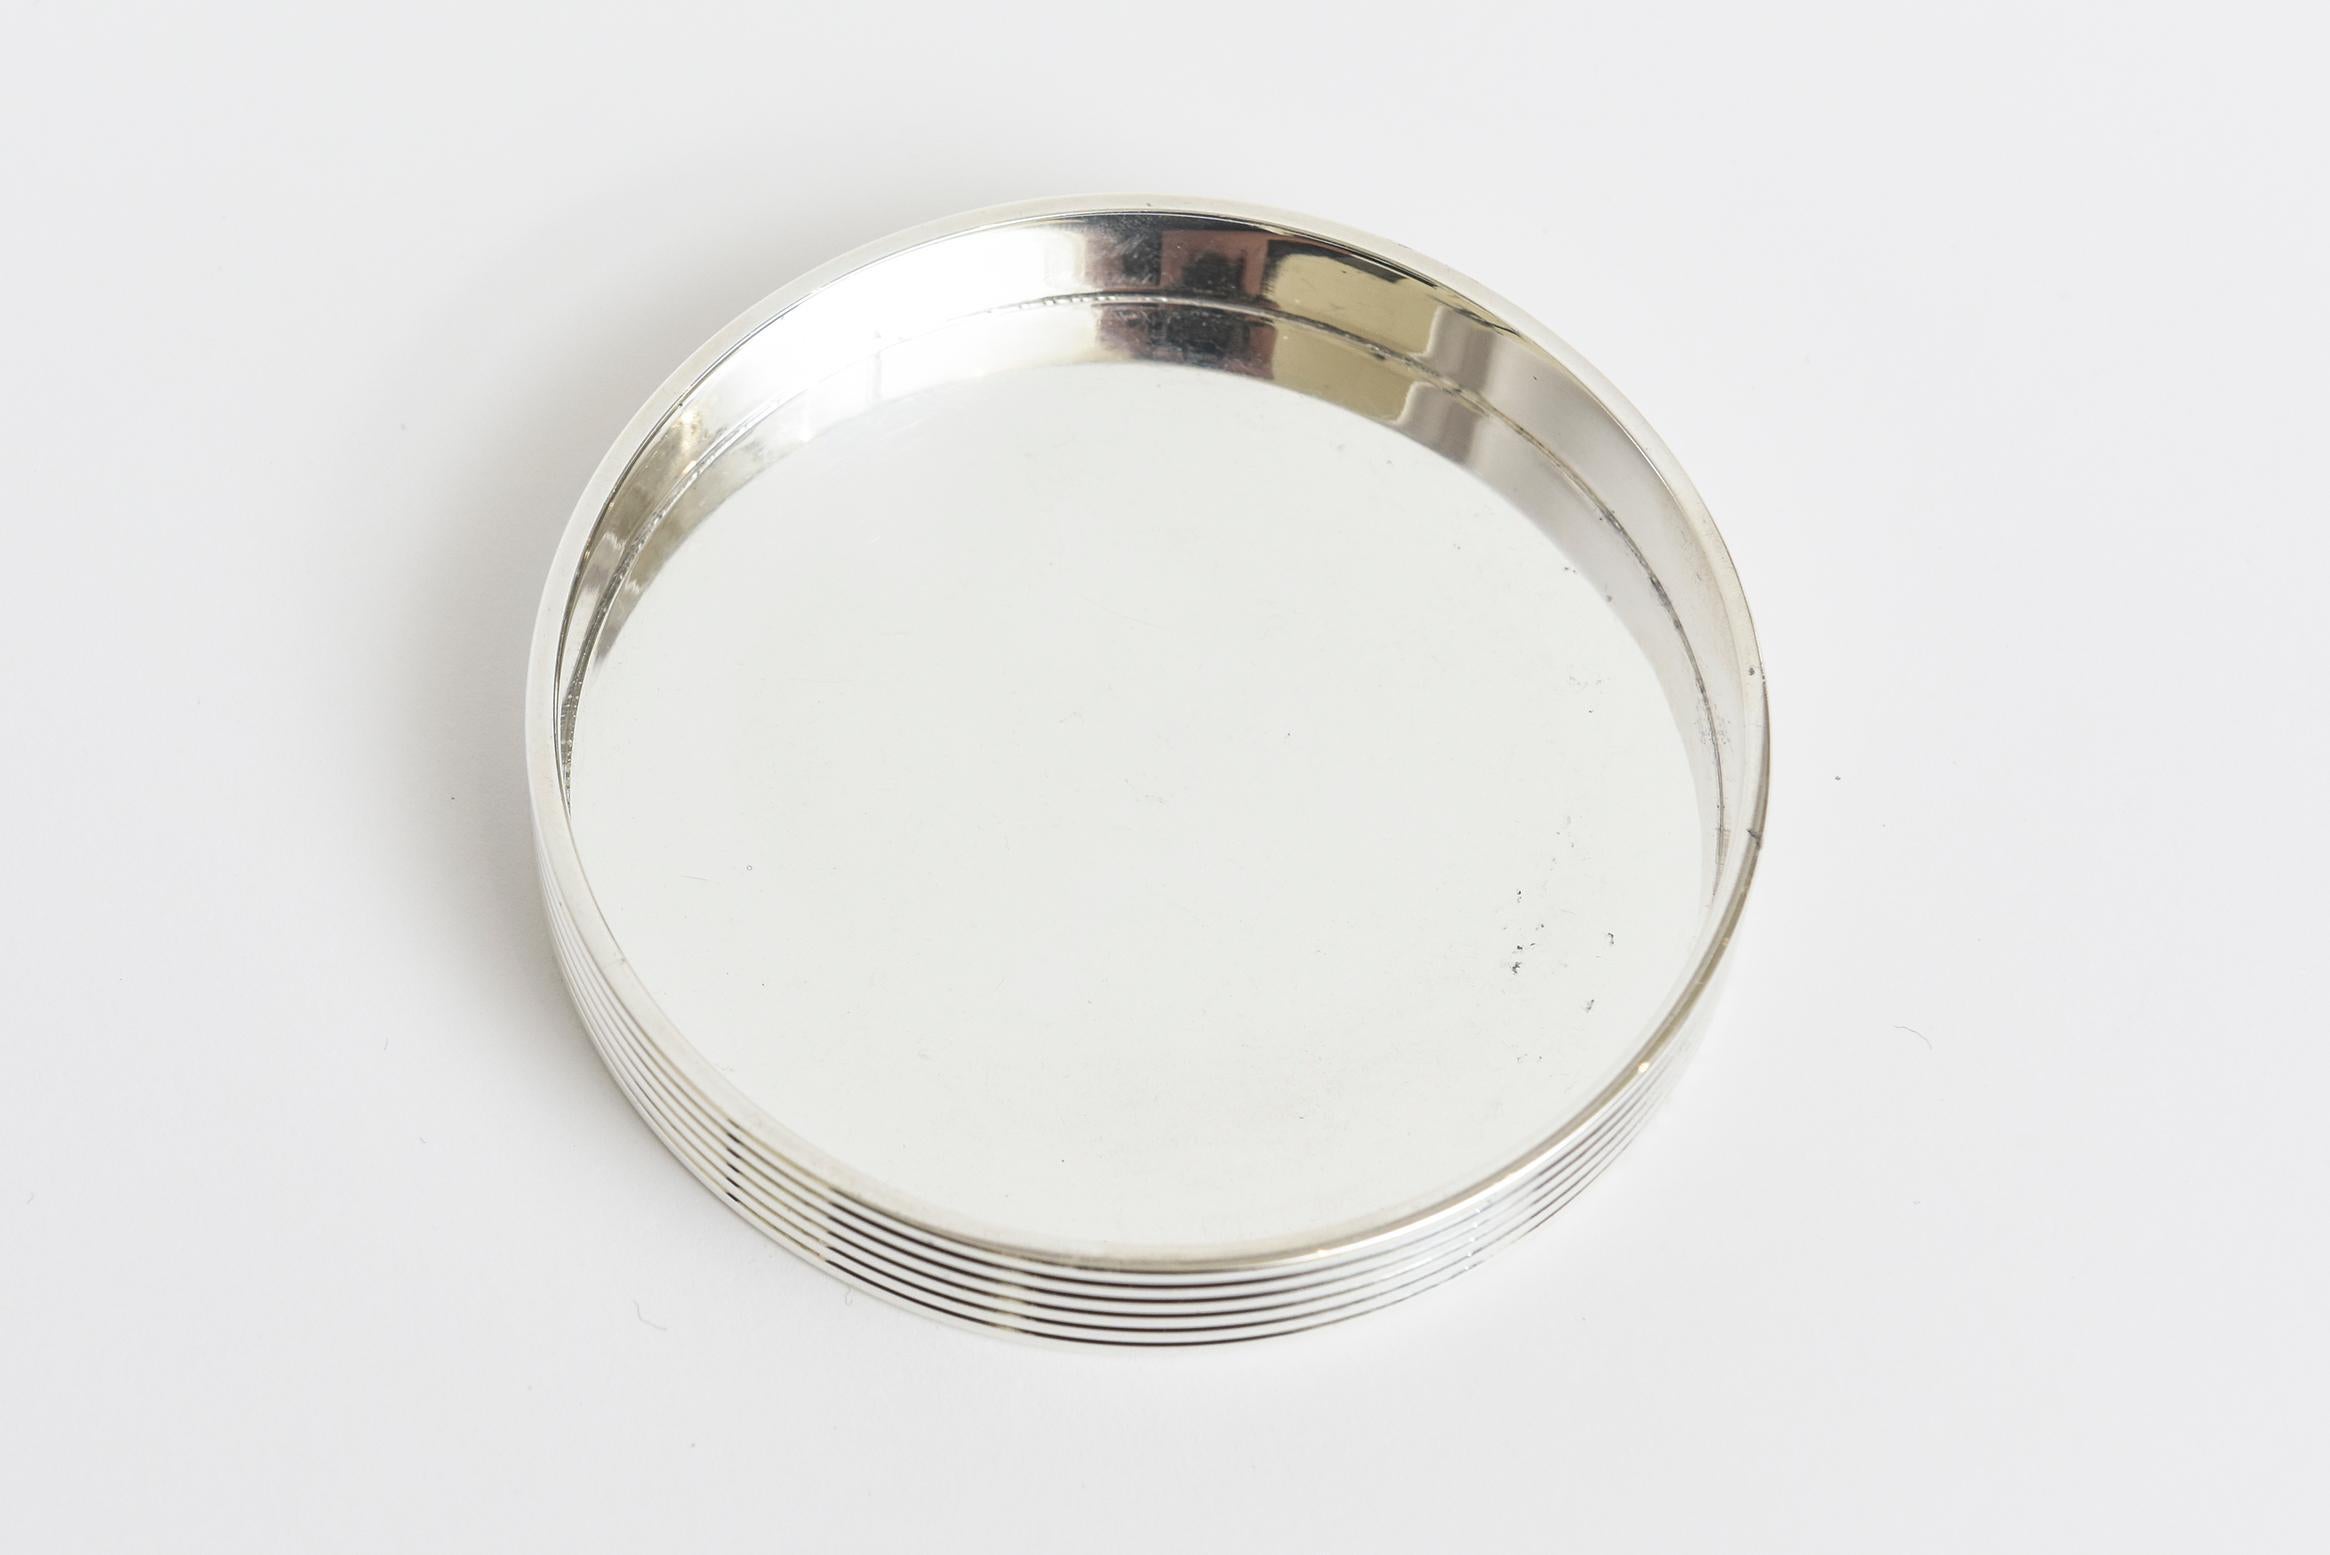 This classic Christofle silver plate wine, bottle, water or champagne coaster or holder is from the K&T collection. It is modernist with 6 beautiful ridged lines as the exterior. This is from 2000. It is hallmarked Christofle K&T. Perfect for all